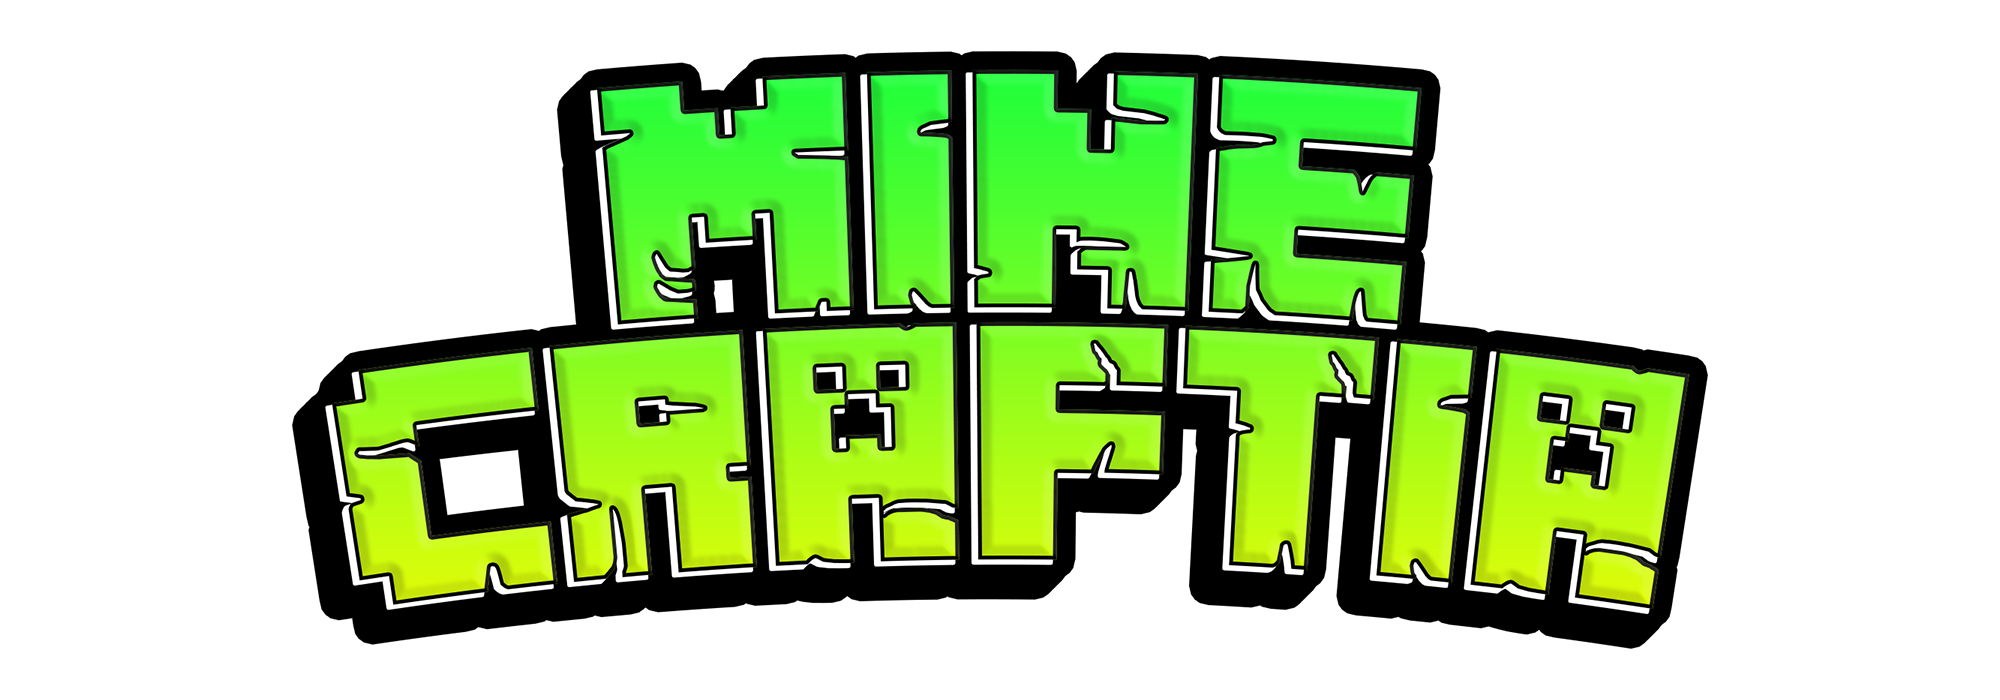 ⭐ Welcome to Minecraftia! ⭐ SURVIVAL✔️ PVP-FRIENDLY✔️ ANTI-GRIEF✔️ Join our Discord! ⭐ Minecraft Server